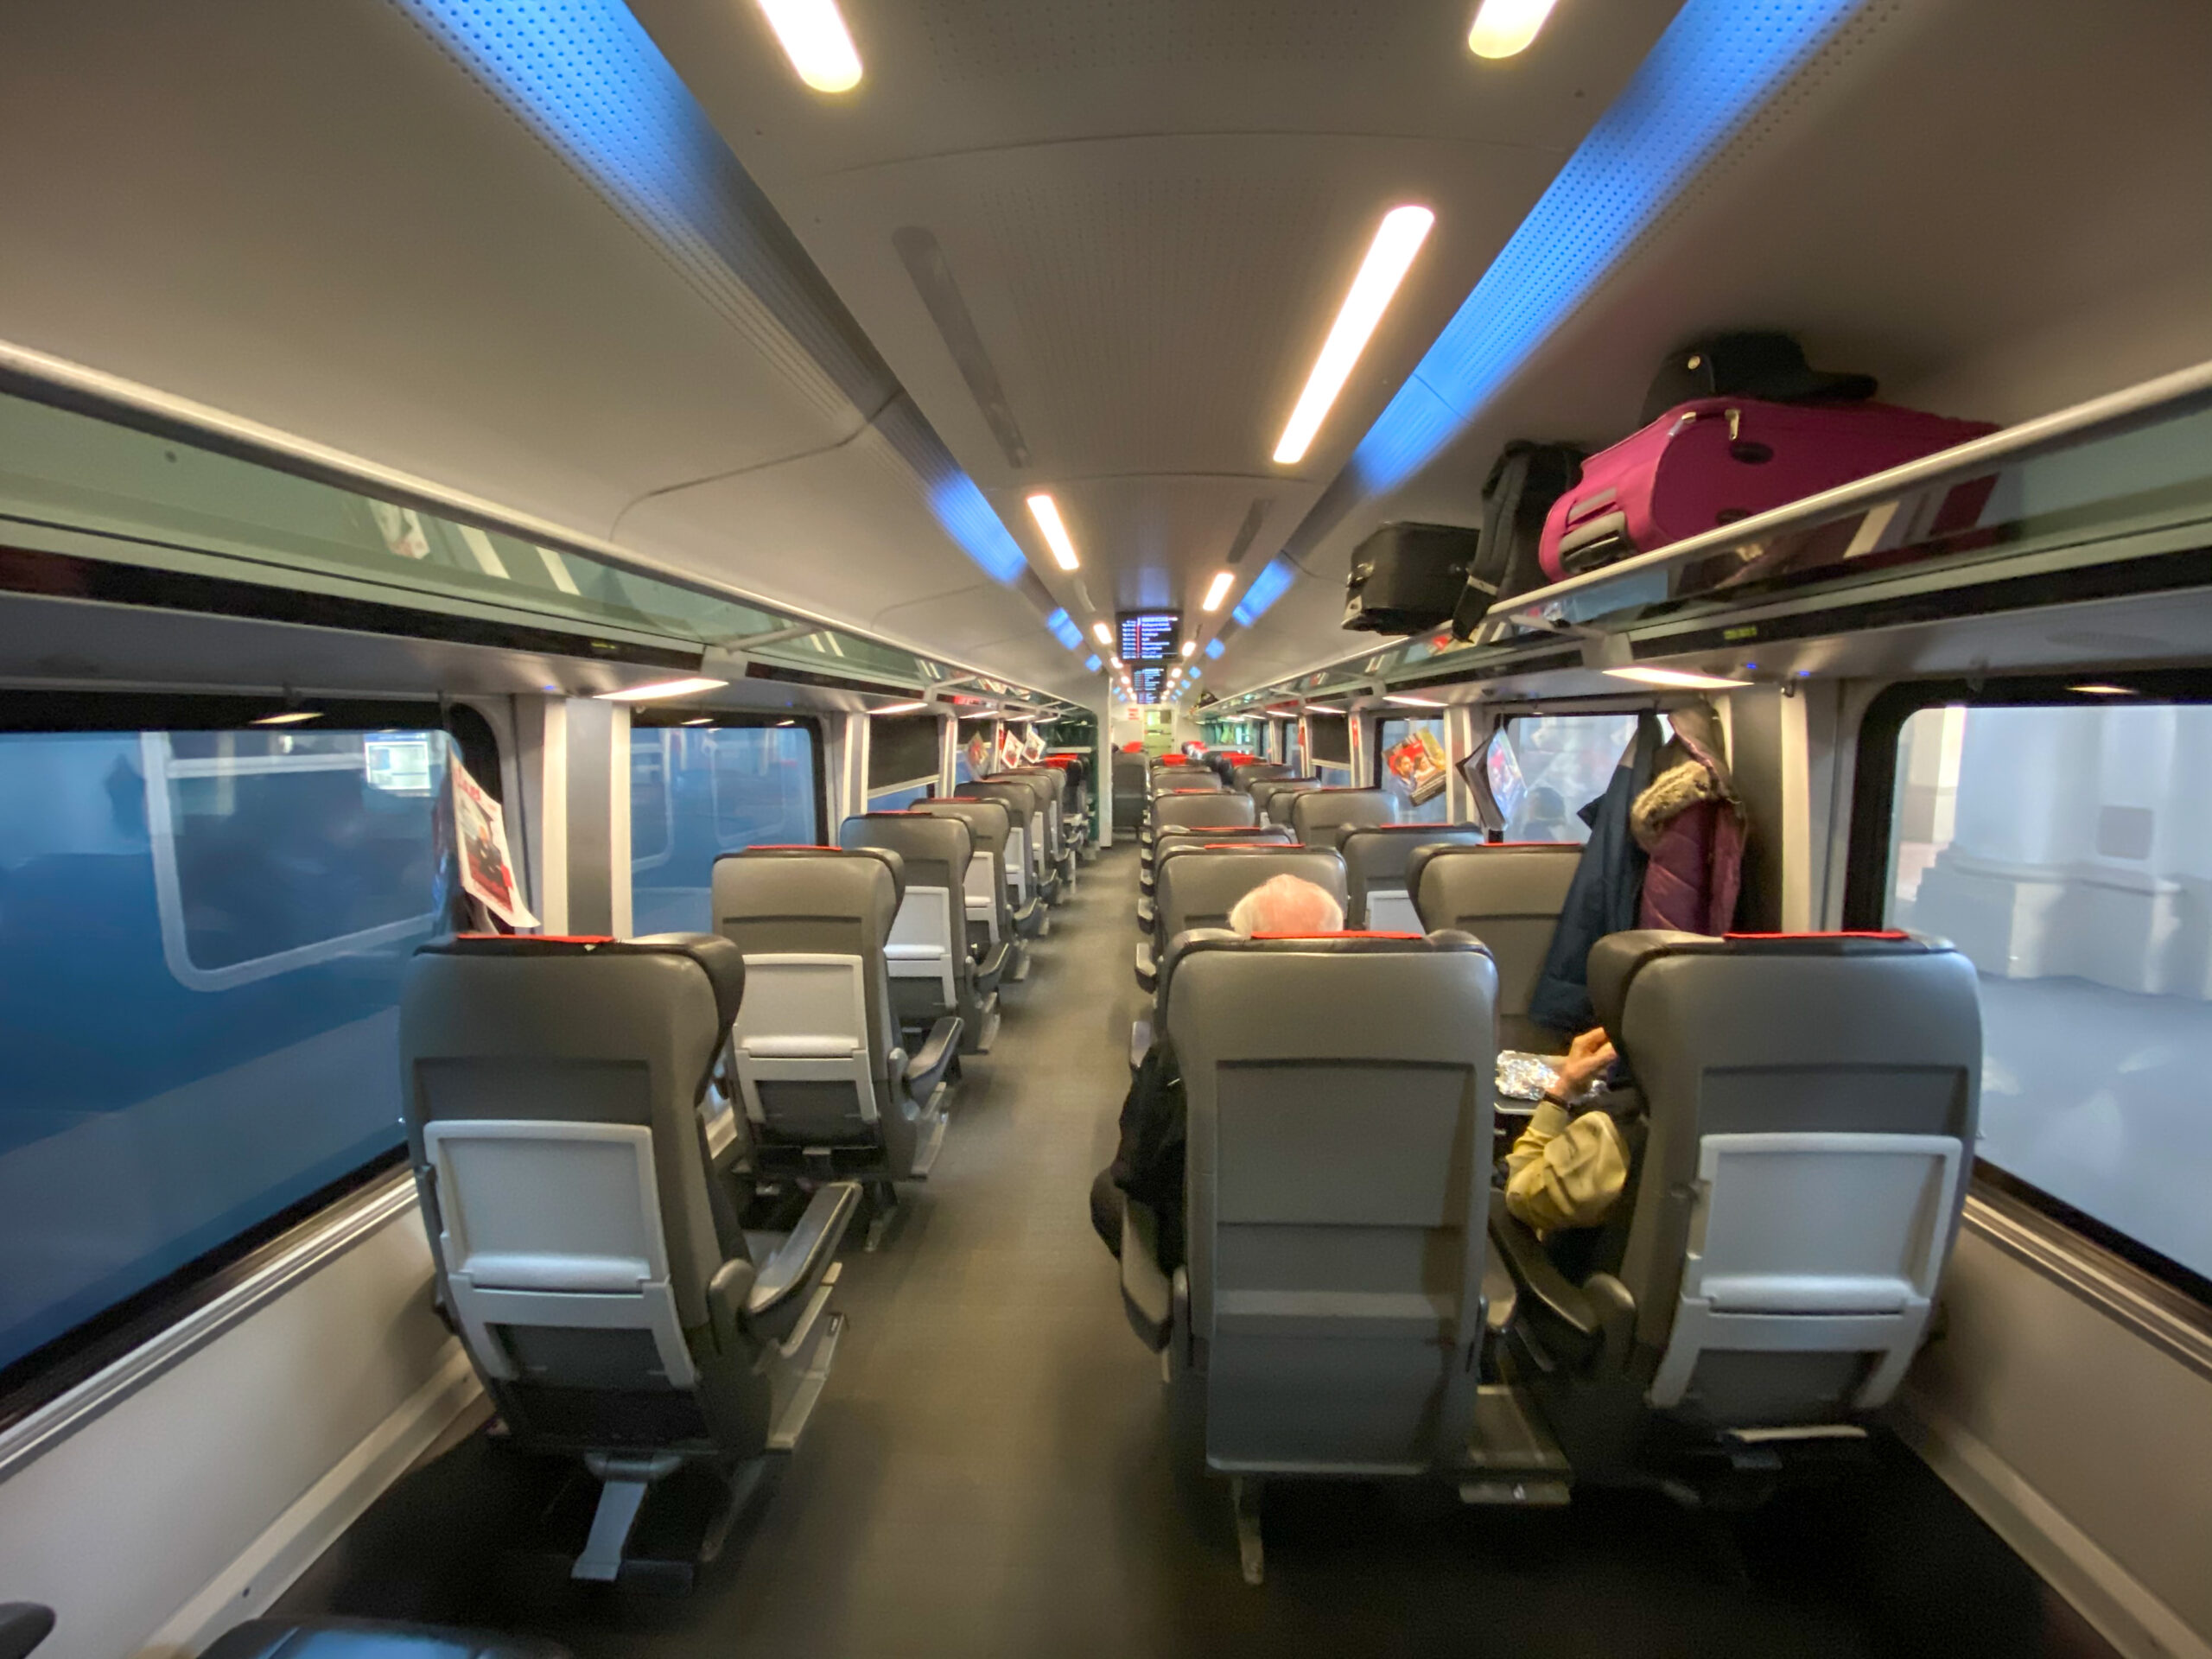 Seats in the first class of RailJet train to Vienna